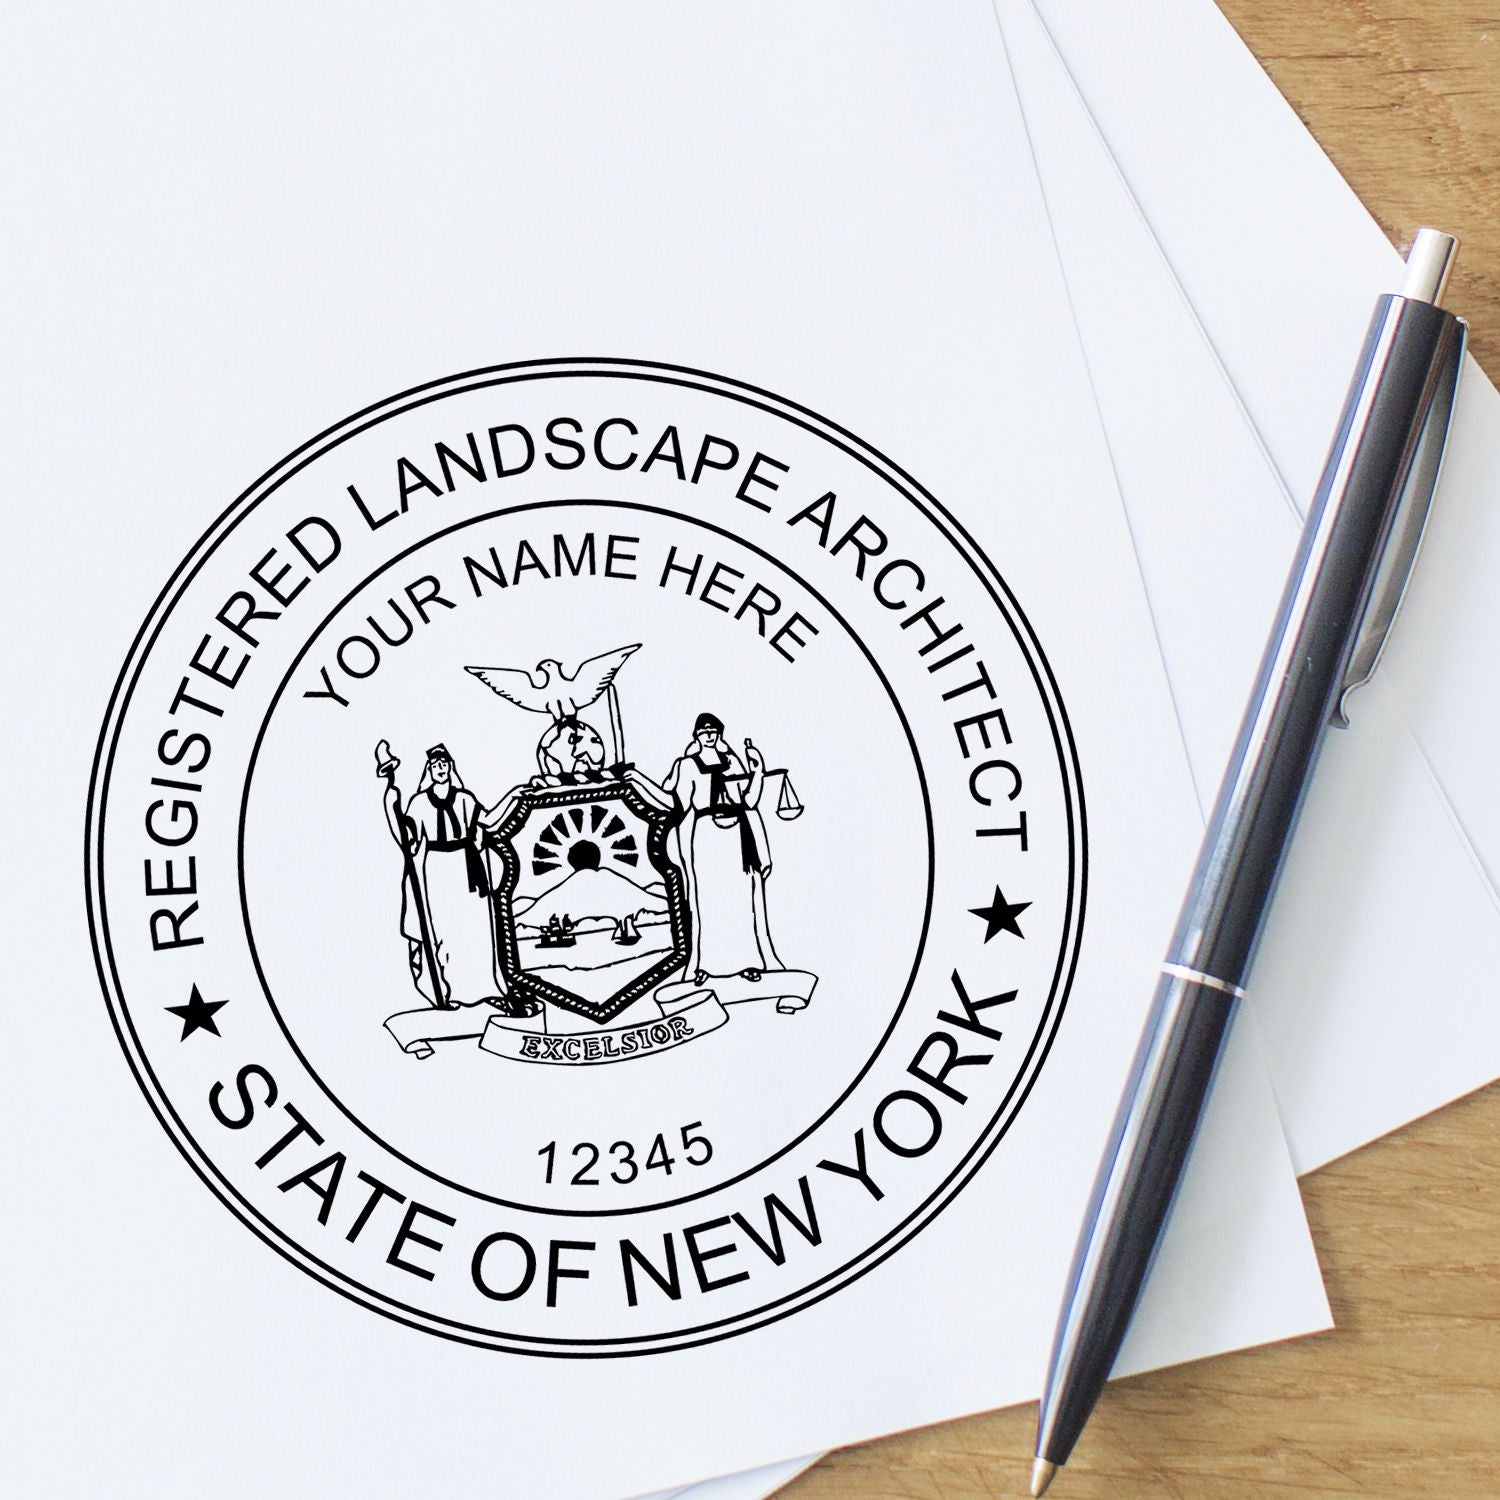 The main image for the Digital New York Landscape Architect Stamp depicting a sample of the imprint and electronic files